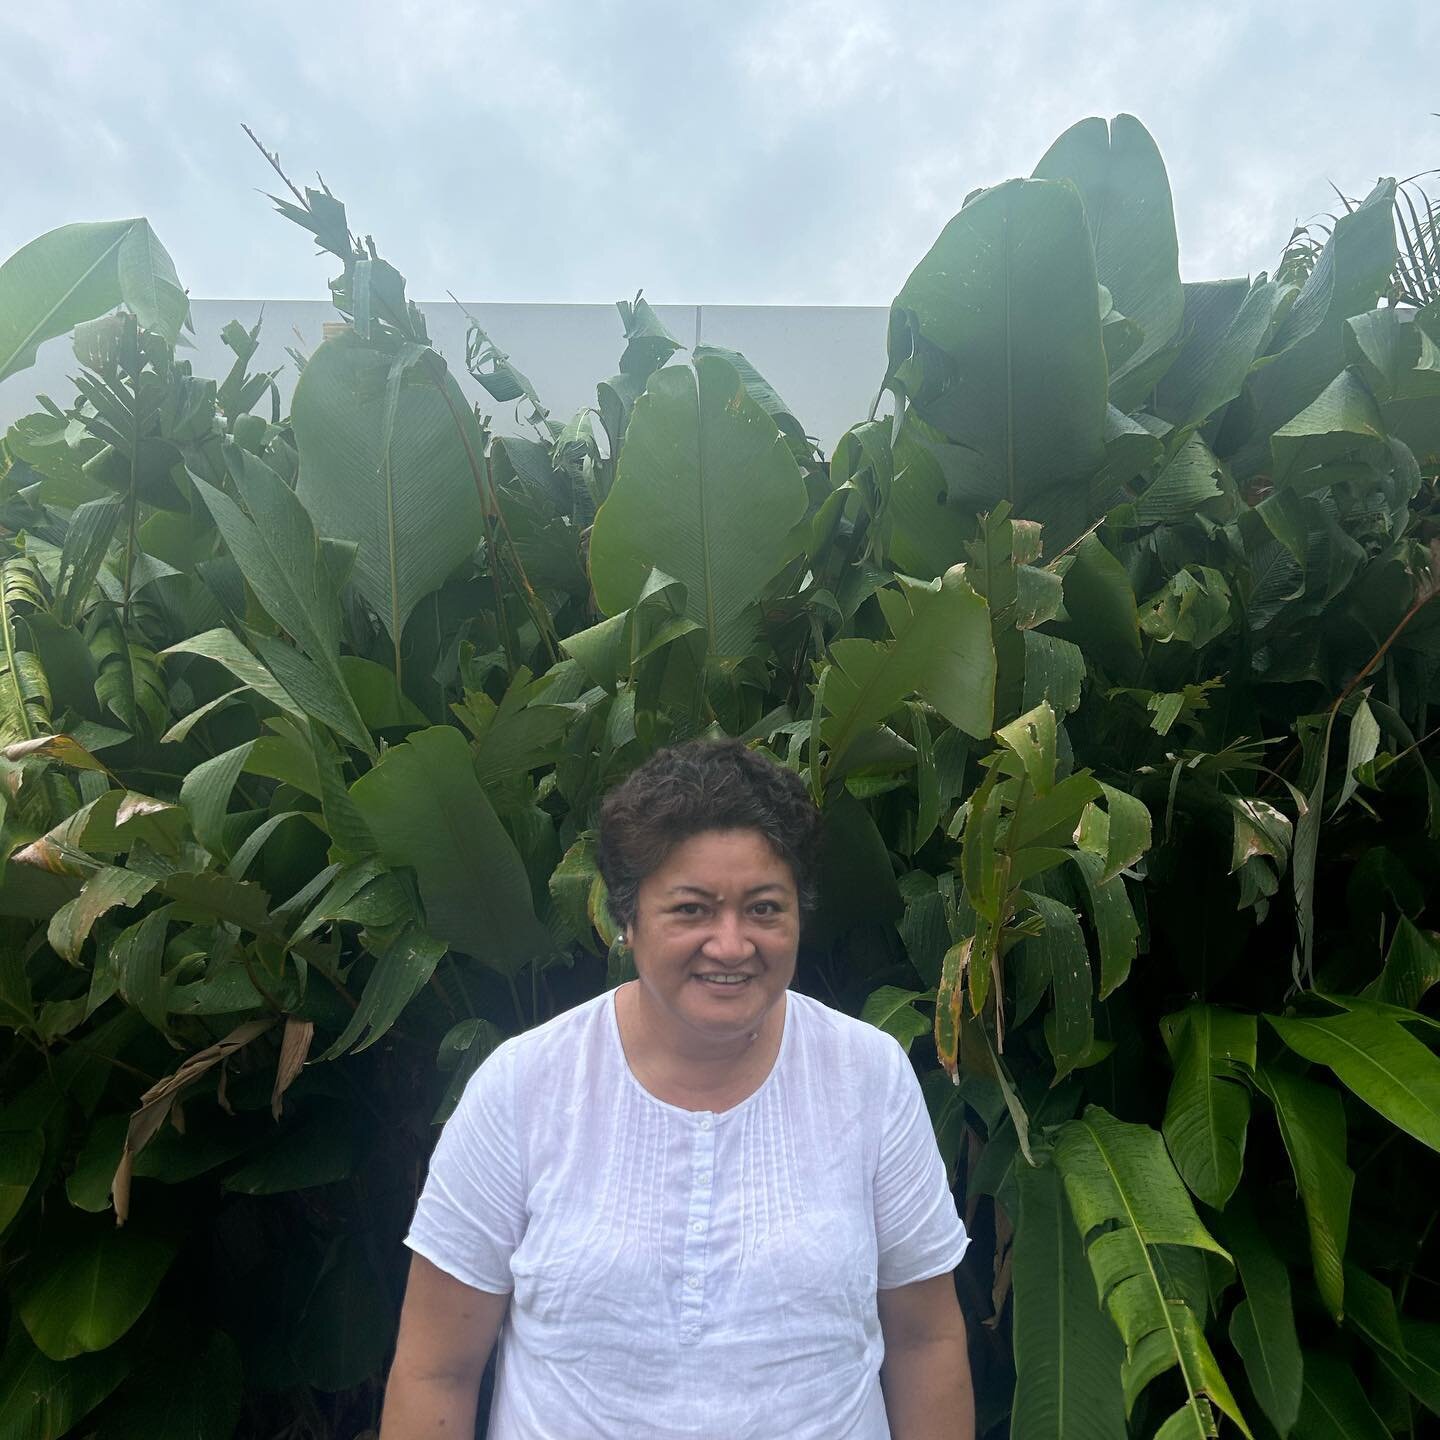 &ldquo;For me, my community library is the best initiative I have ever set up in the village&rdquo; 

Marie Pene, a Fiji Book Drive Ambassador set up a community library and a book club on the veranda of her house which is now the community library i